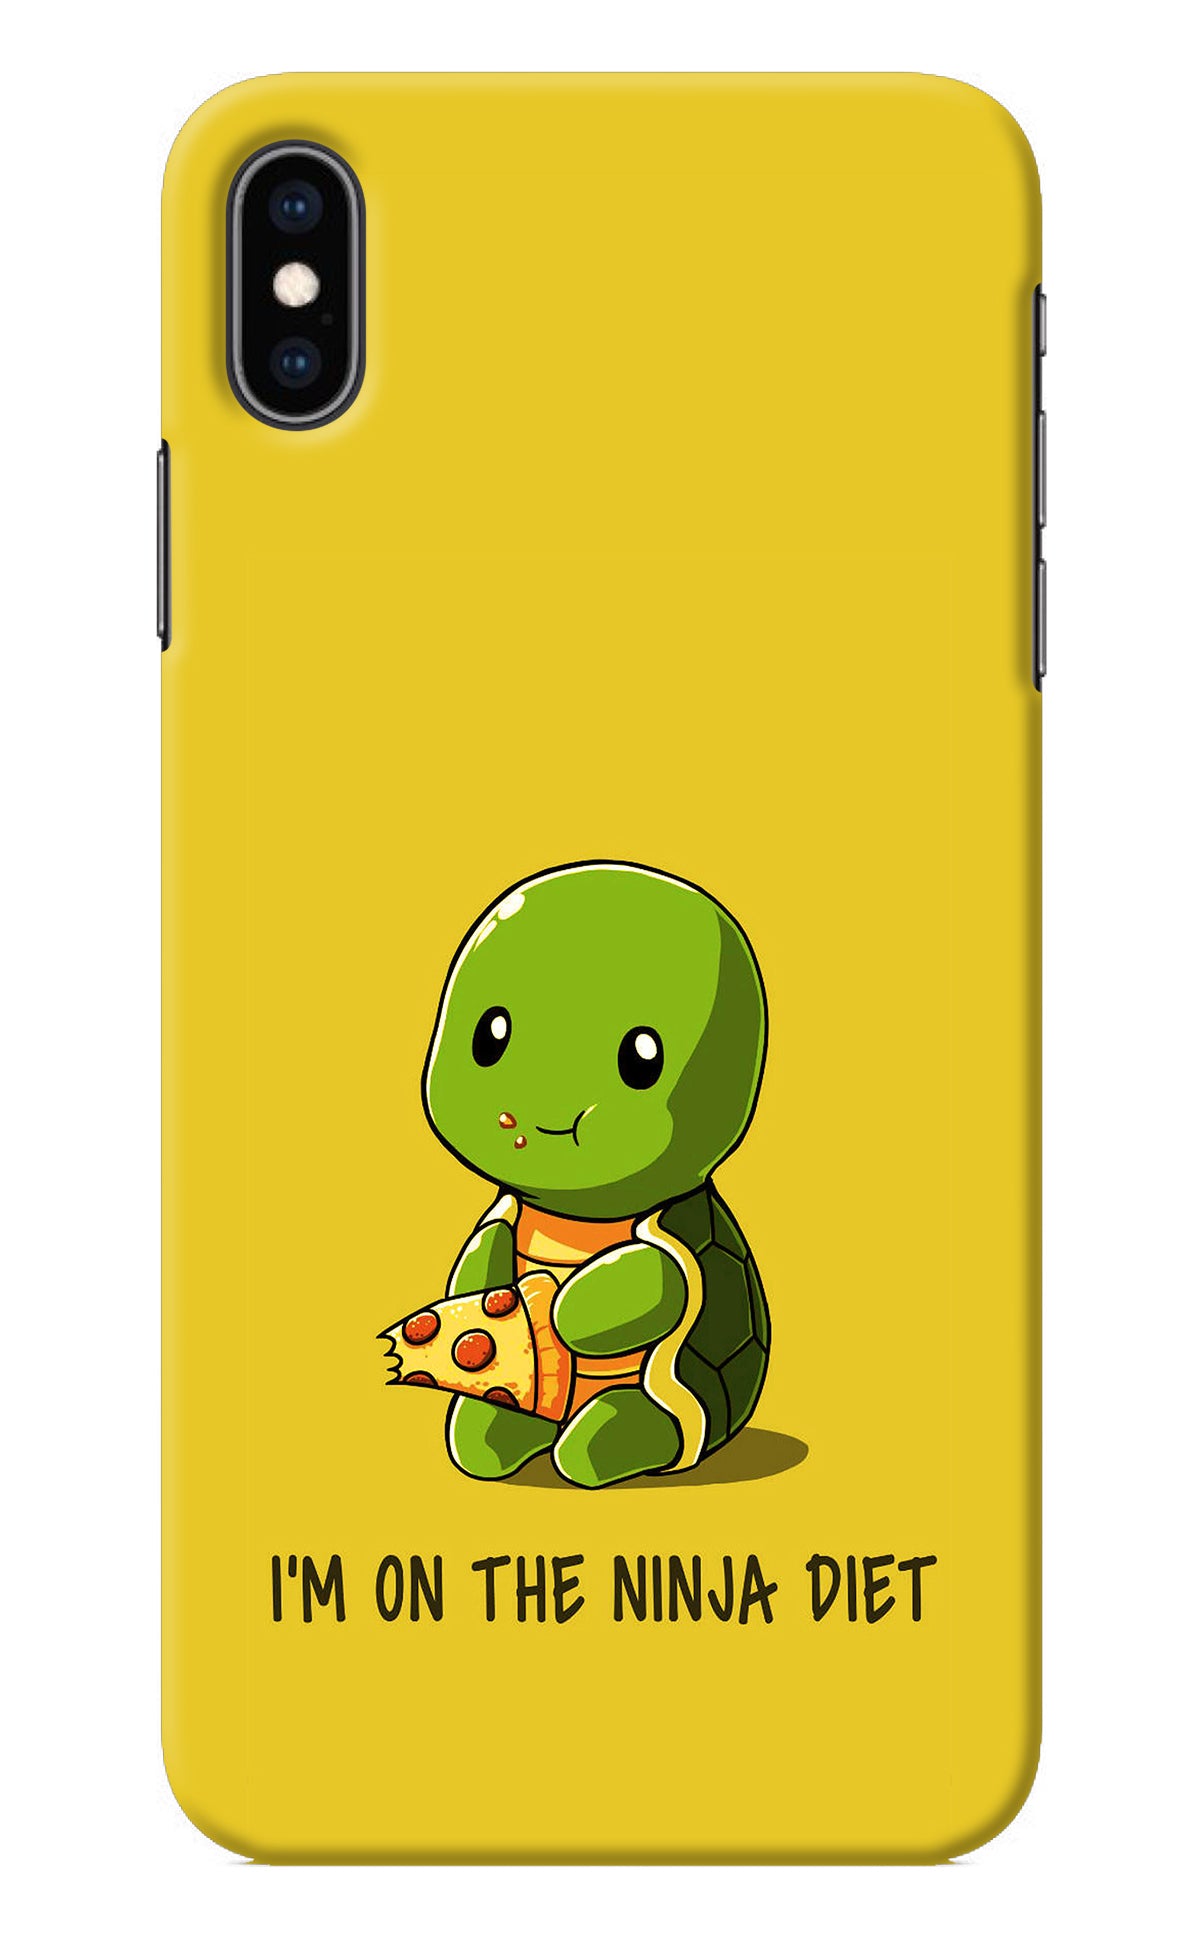 I'm on Ninja Diet iPhone XS Max Back Cover